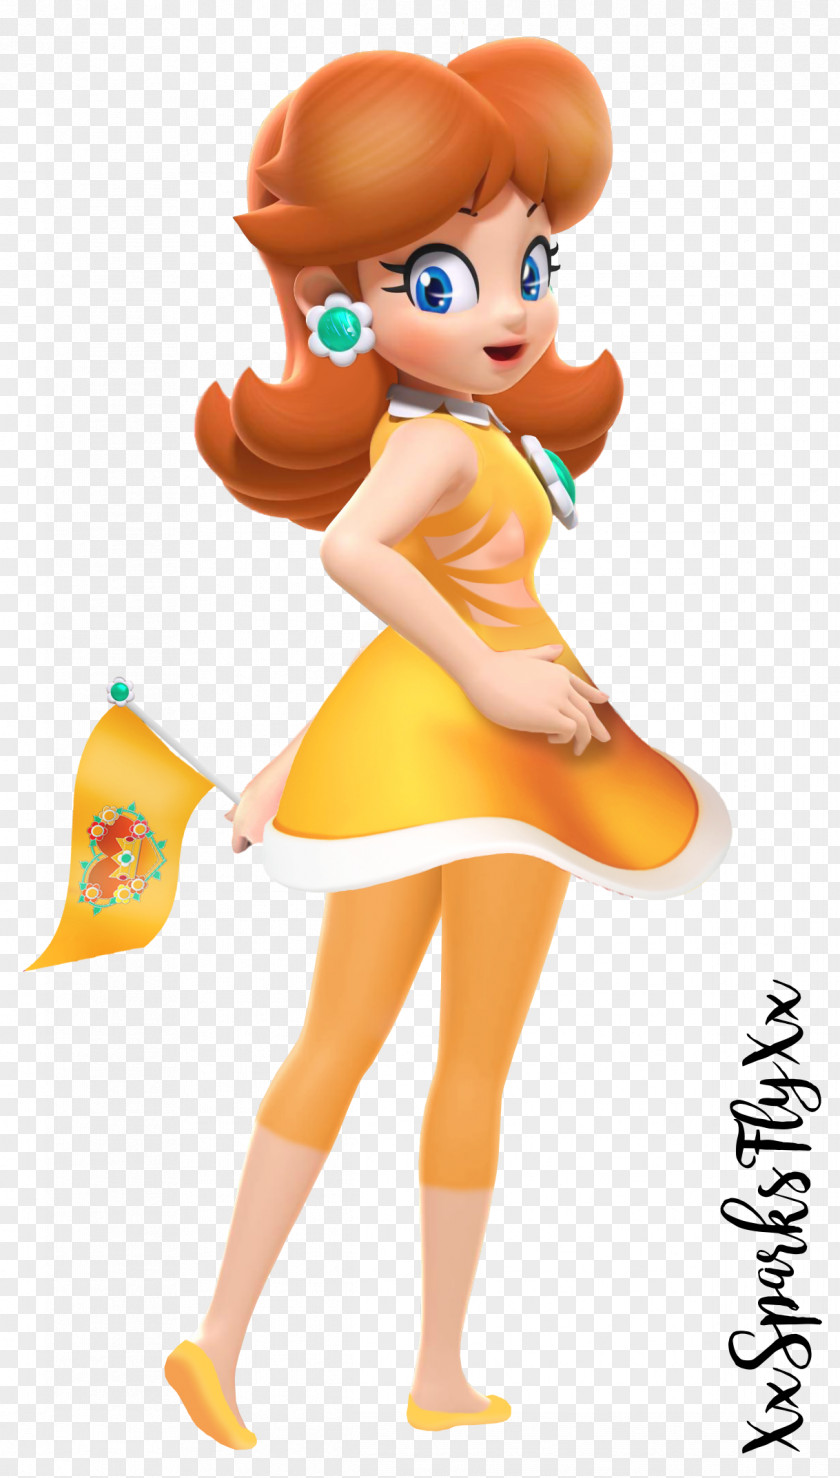 Daisy Super Mario Sunshine Tennis: Ultra Smash Strikers Charged PNG